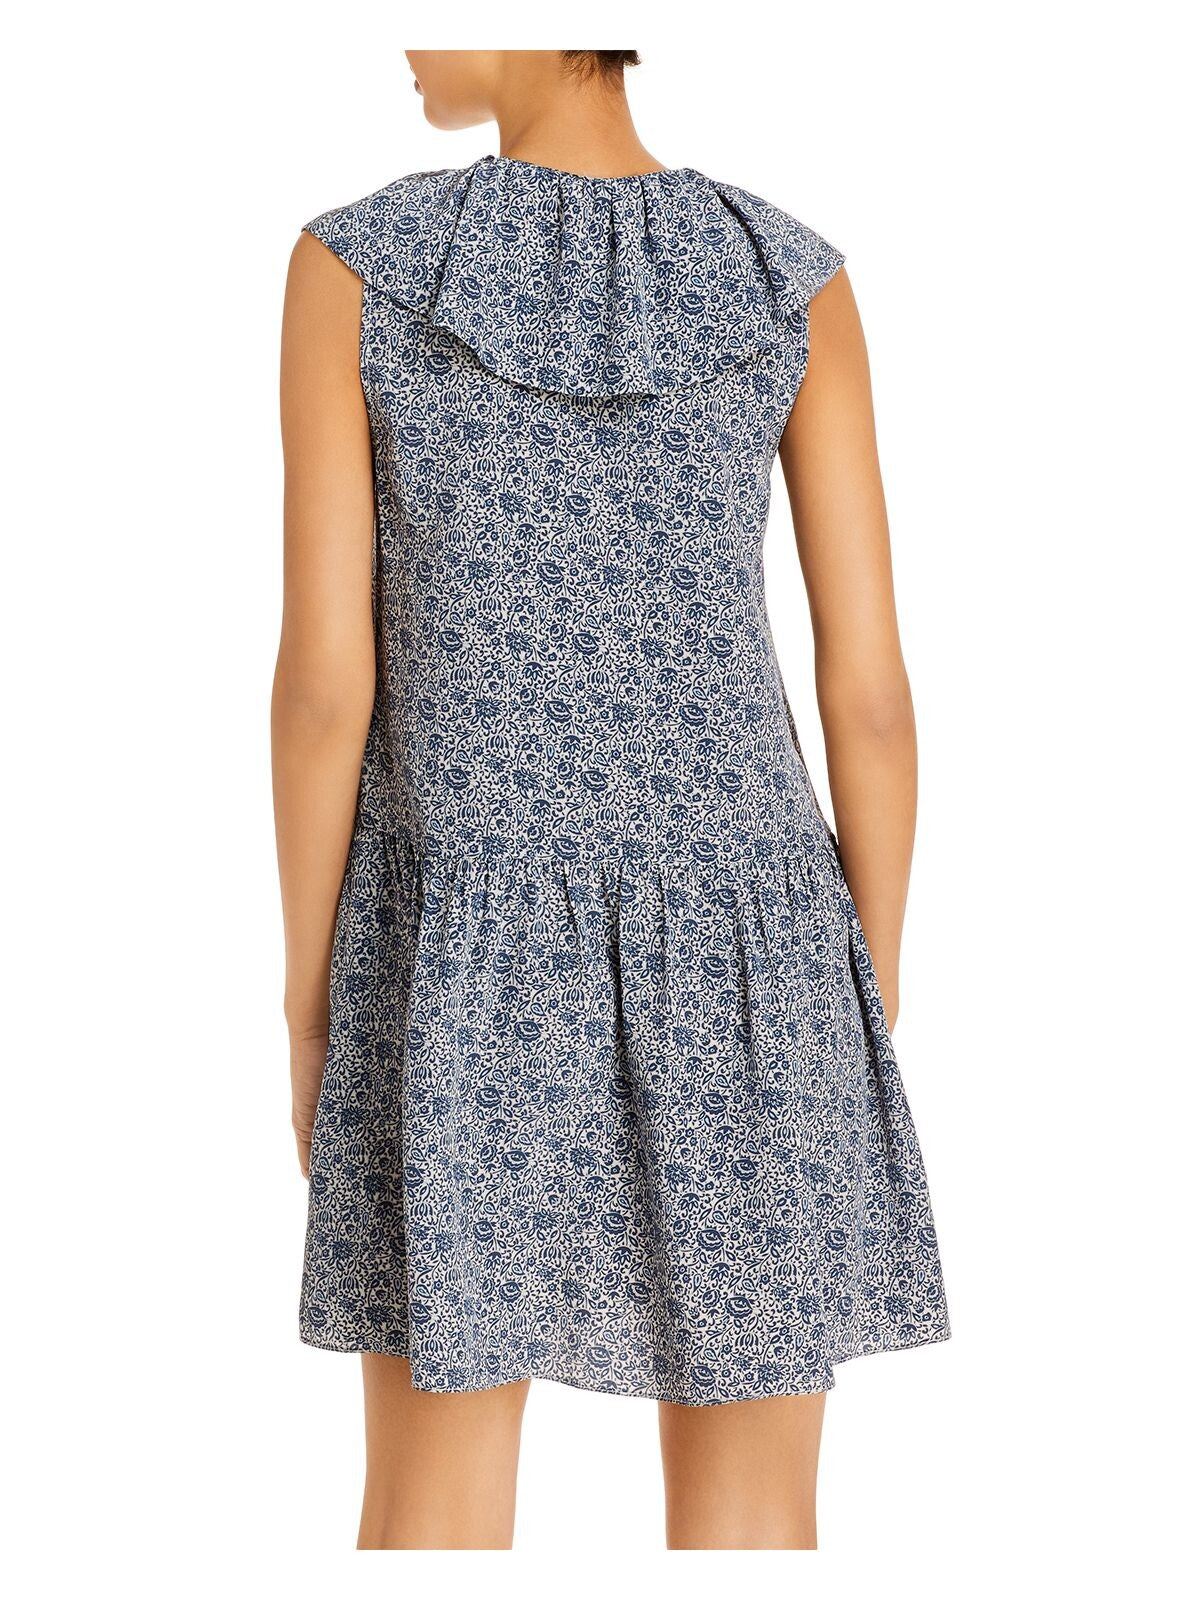 REBECCA TAYLOR Womens Blue Ruffled Lace Up  Lined Floral Sleeveless Split Short Wear To Work Fit + Flare Dress XS